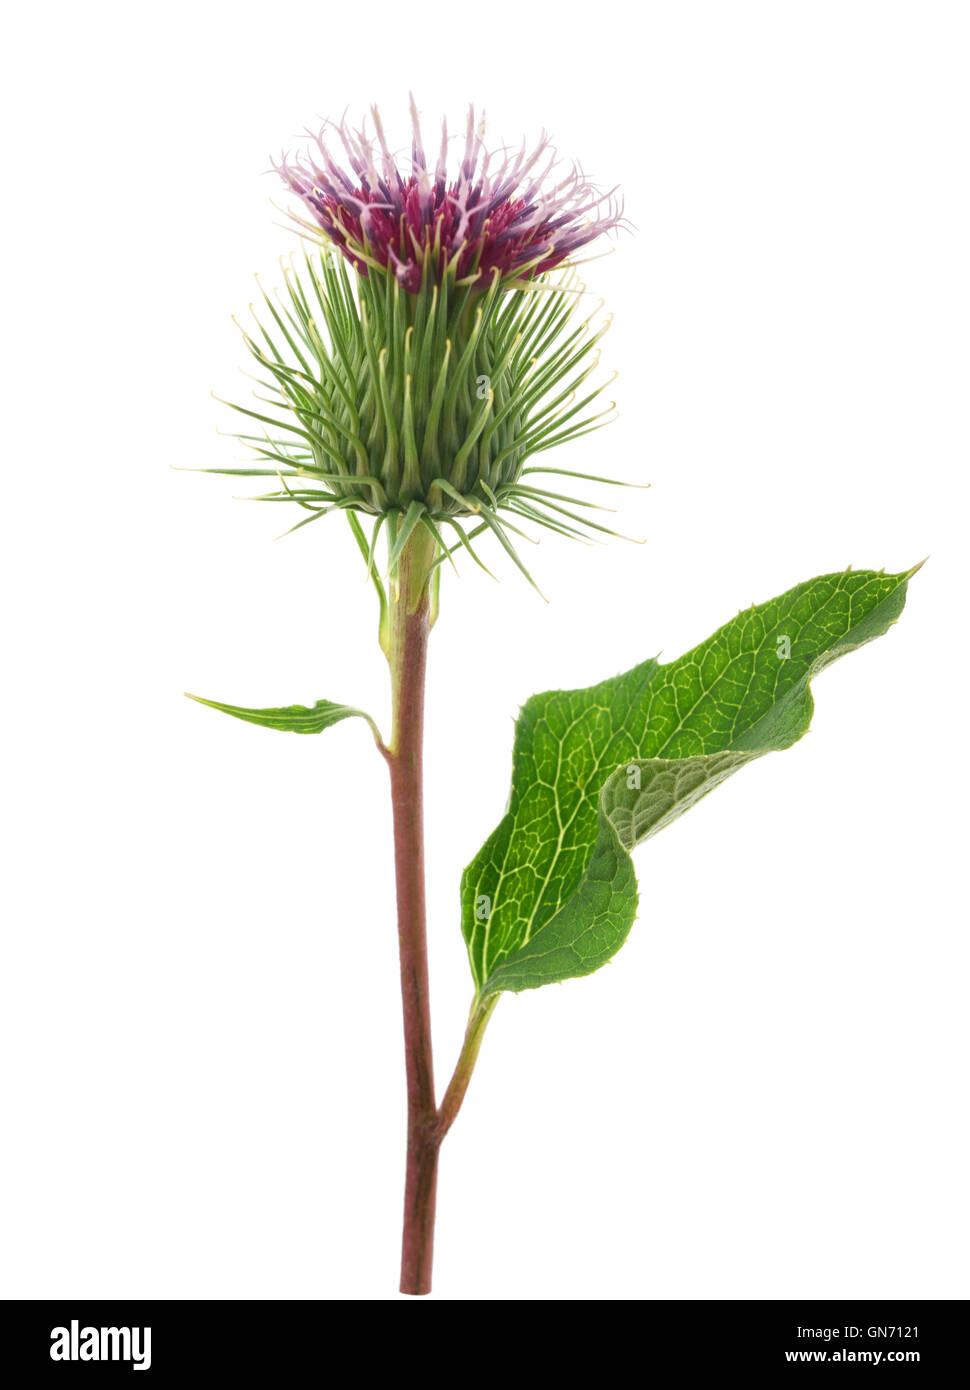 Burdock flower isolated on a white background Stock Photo